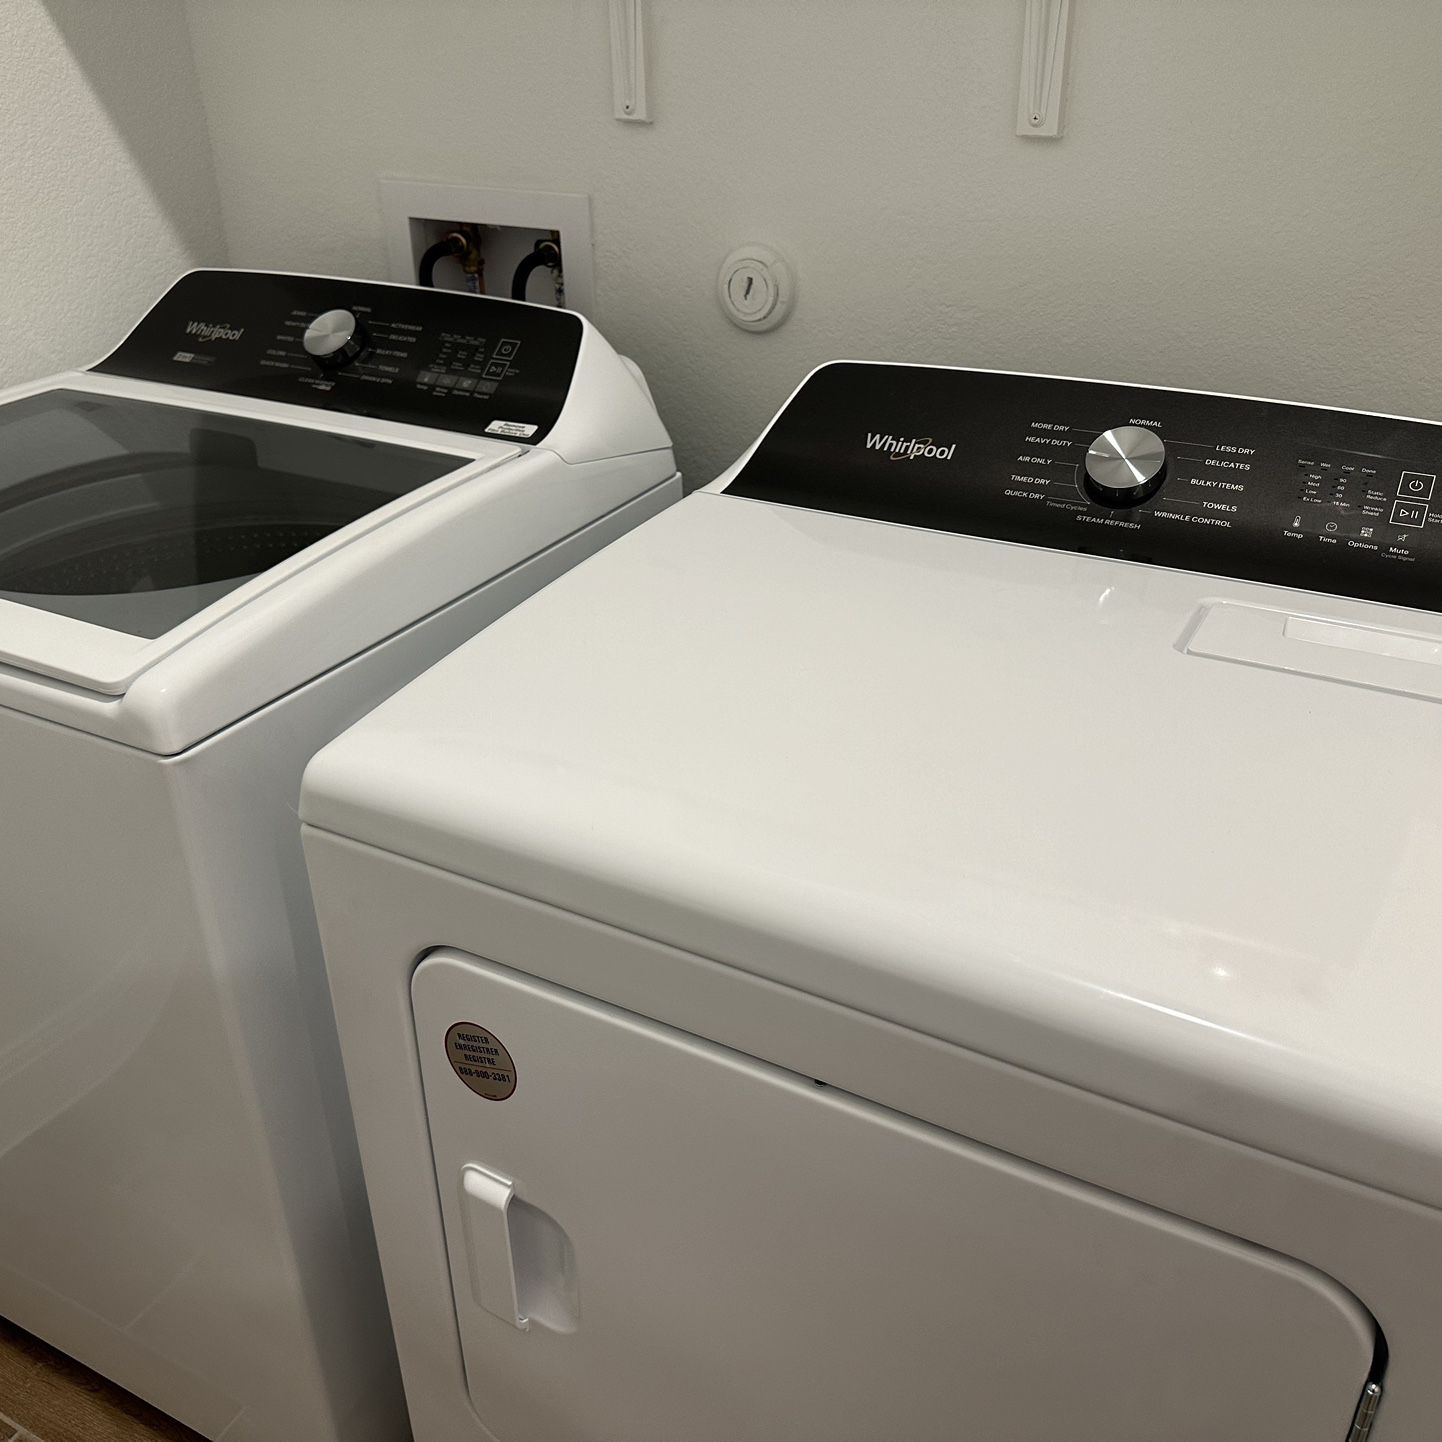 Brandnew Whirlpool Washer and Dryer Set (Electric)